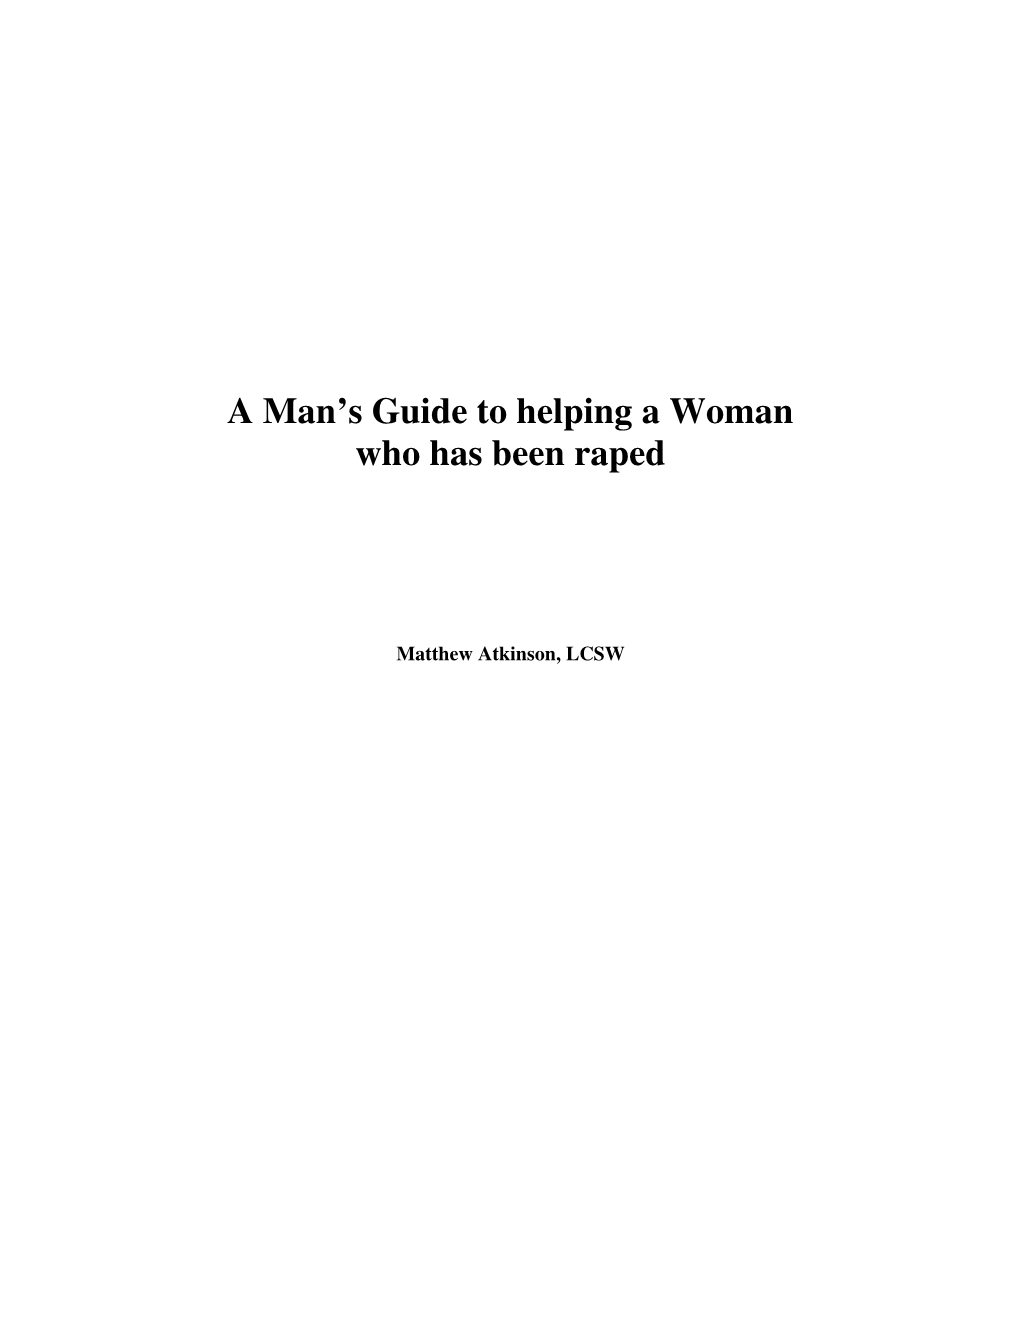 A Man's Guide to Helping a Woman Who Has Been Raped